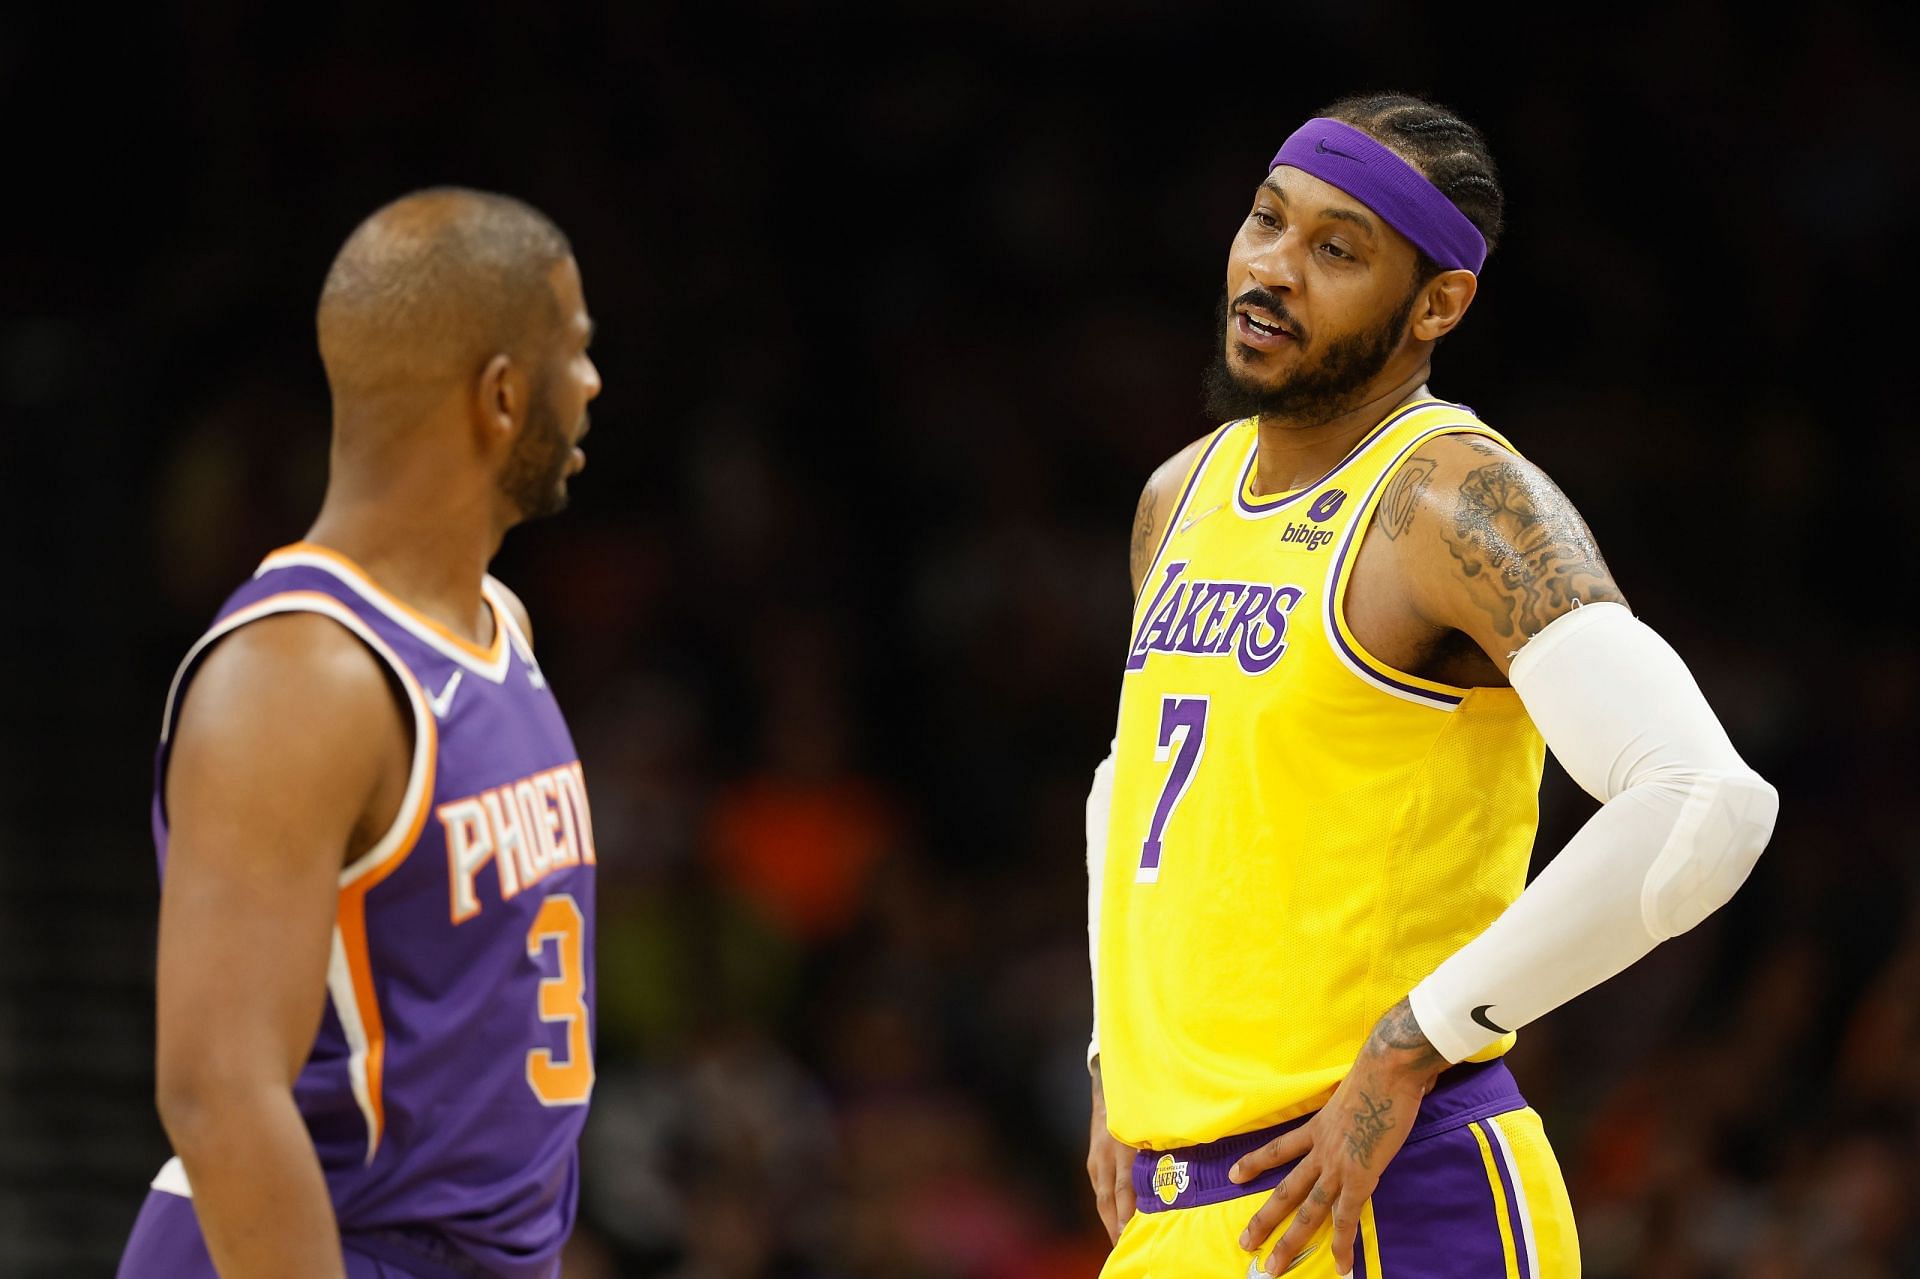 Phoenix Suns All-Star point guard Chris Paul and former LA Lakers forward Carmelo Anthony